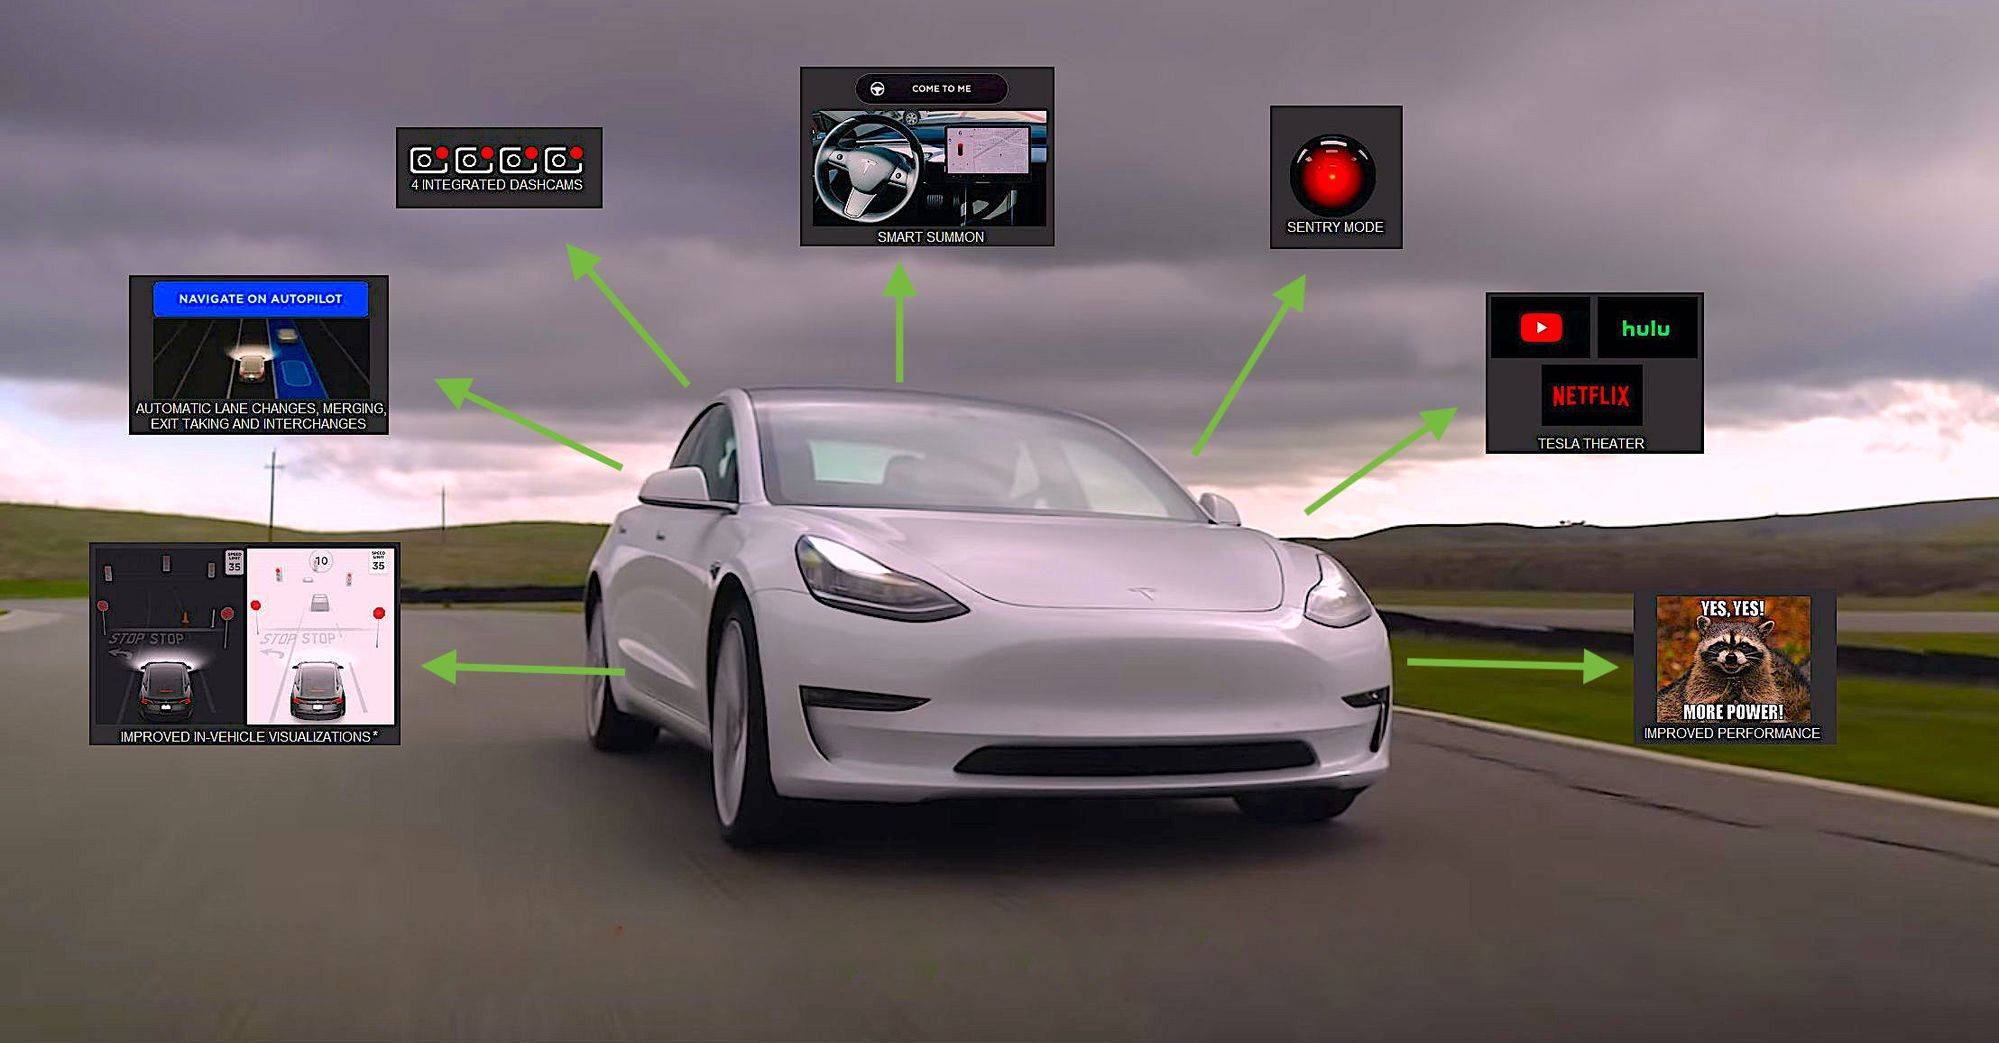 Tesla Cars Have Free System-Wide OTA Updates, While Ford Charges $149 for a USB Map Refresh